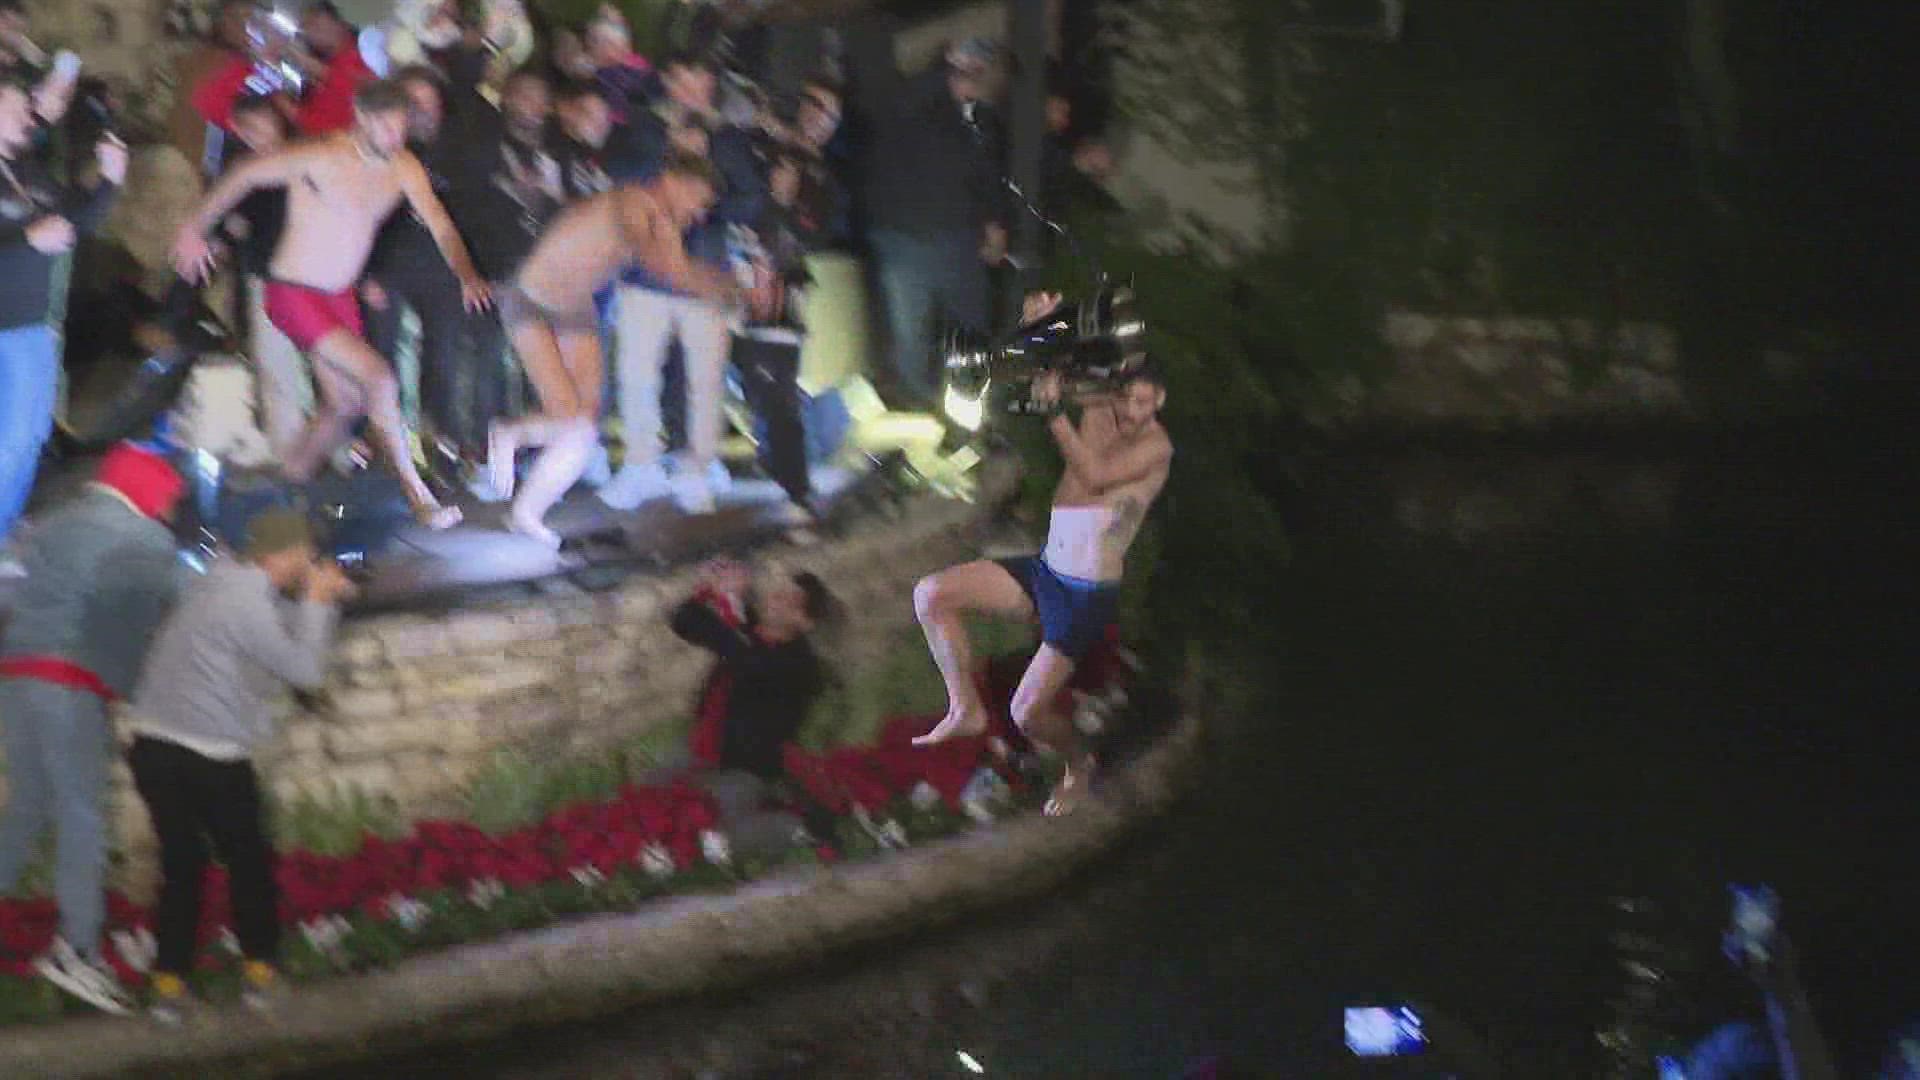 It was a chilly afternoon in downtown San Antonio, but that didn't stop several SAFC players from ripping off their clothes and leaping into the river.